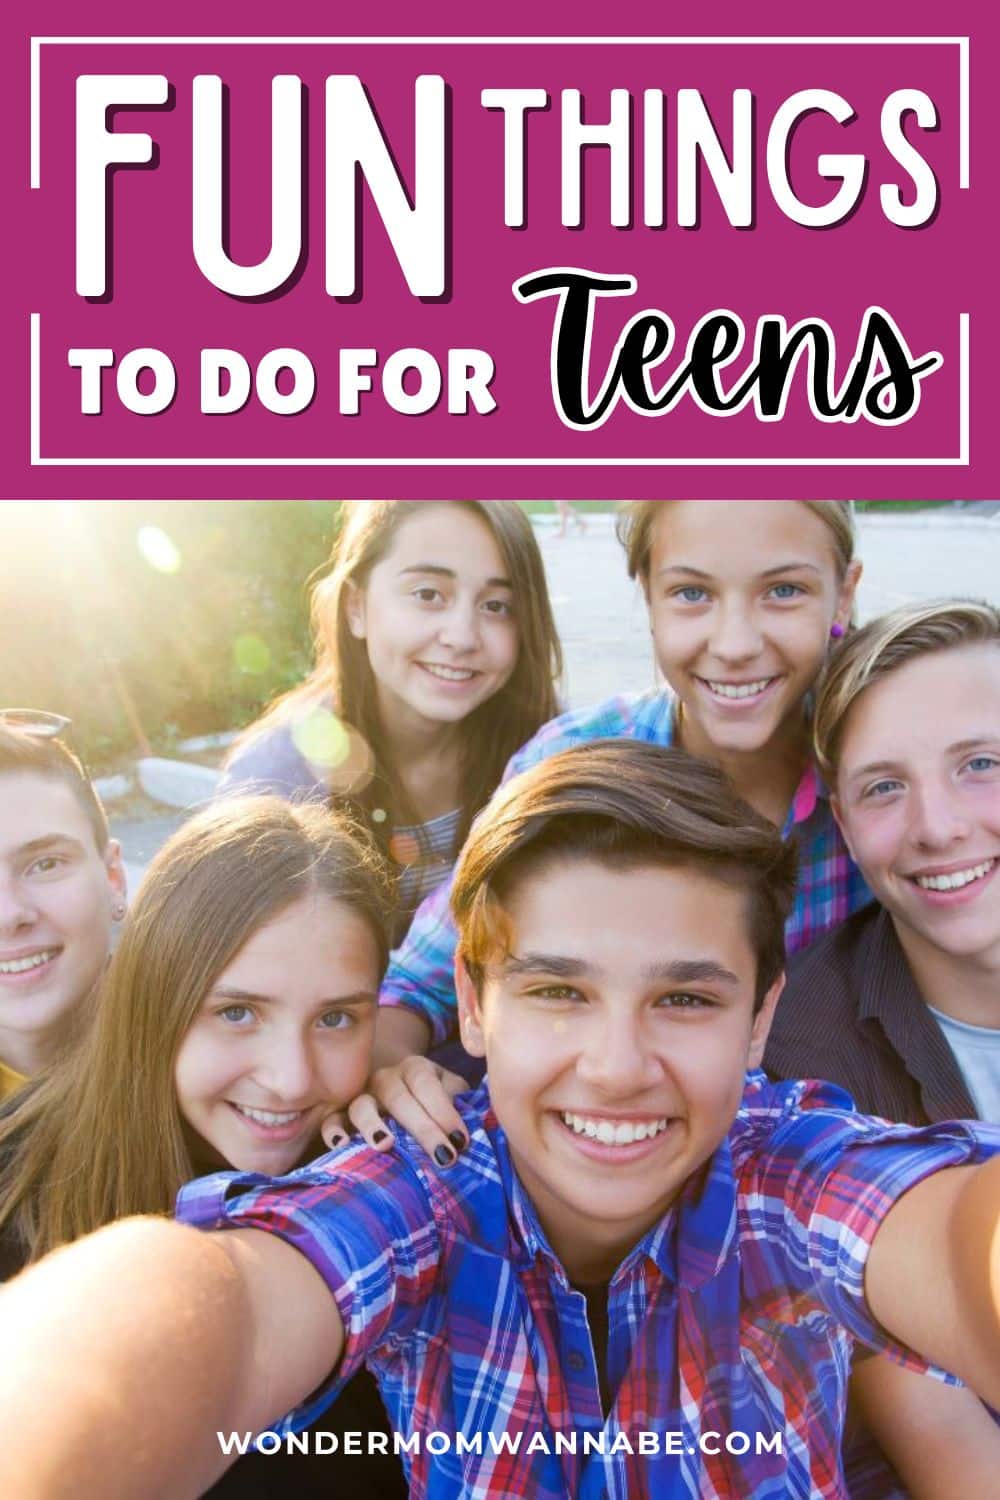 Exciting activities for teens to enjoy.